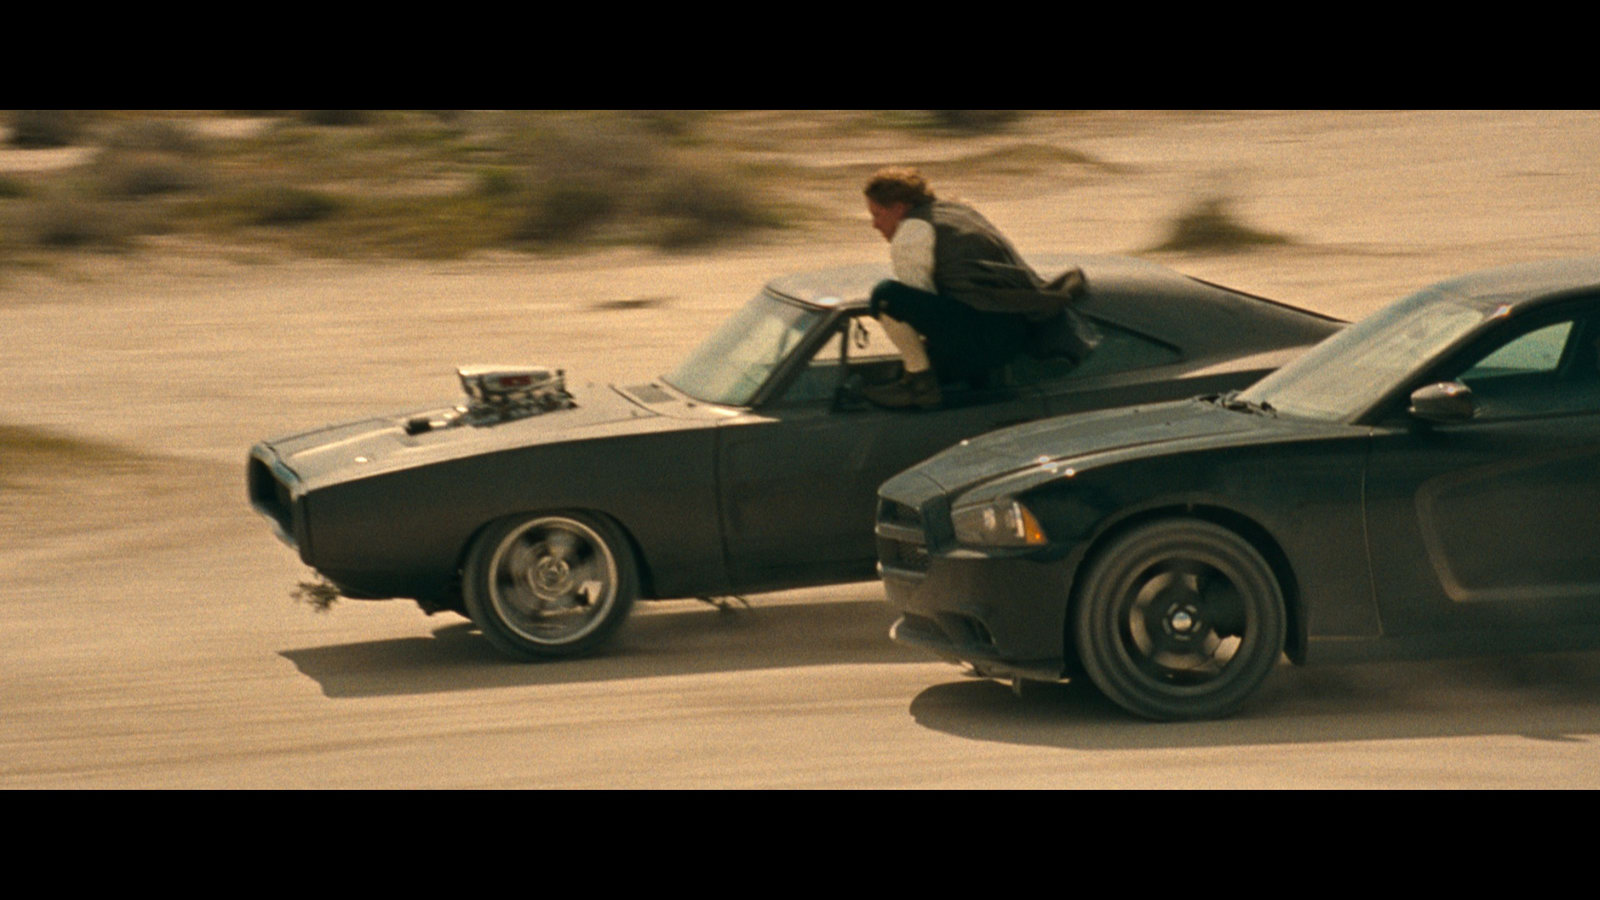 VIDEO: New Dodge Charger Ad Inaugurates Fast and Furious Five Partnership |  Carscoops